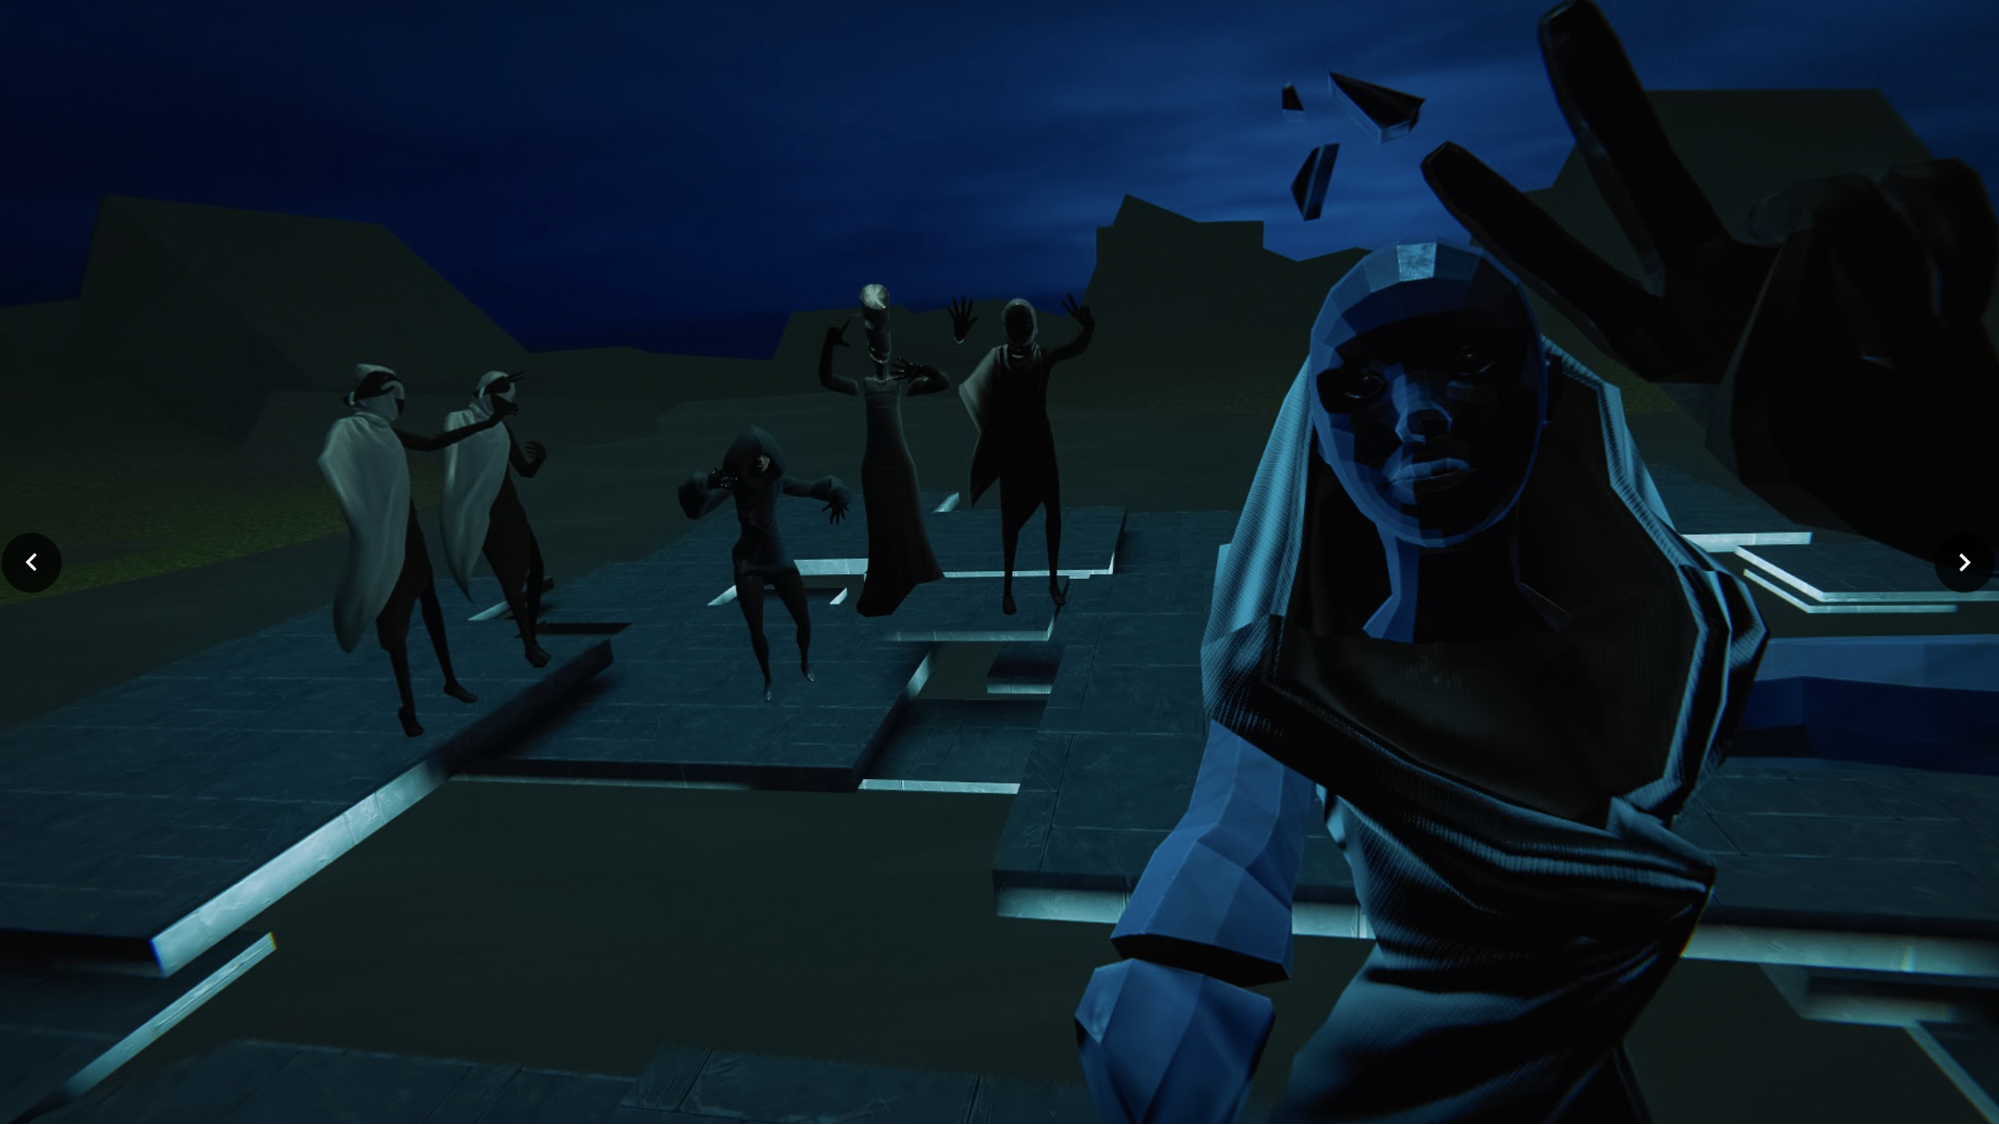 A group of people a stranding on slabs in a desert-like place. There is someone close to you, facing you and holding onto you. Their hand is stretched above you. All the people are blue and bald.